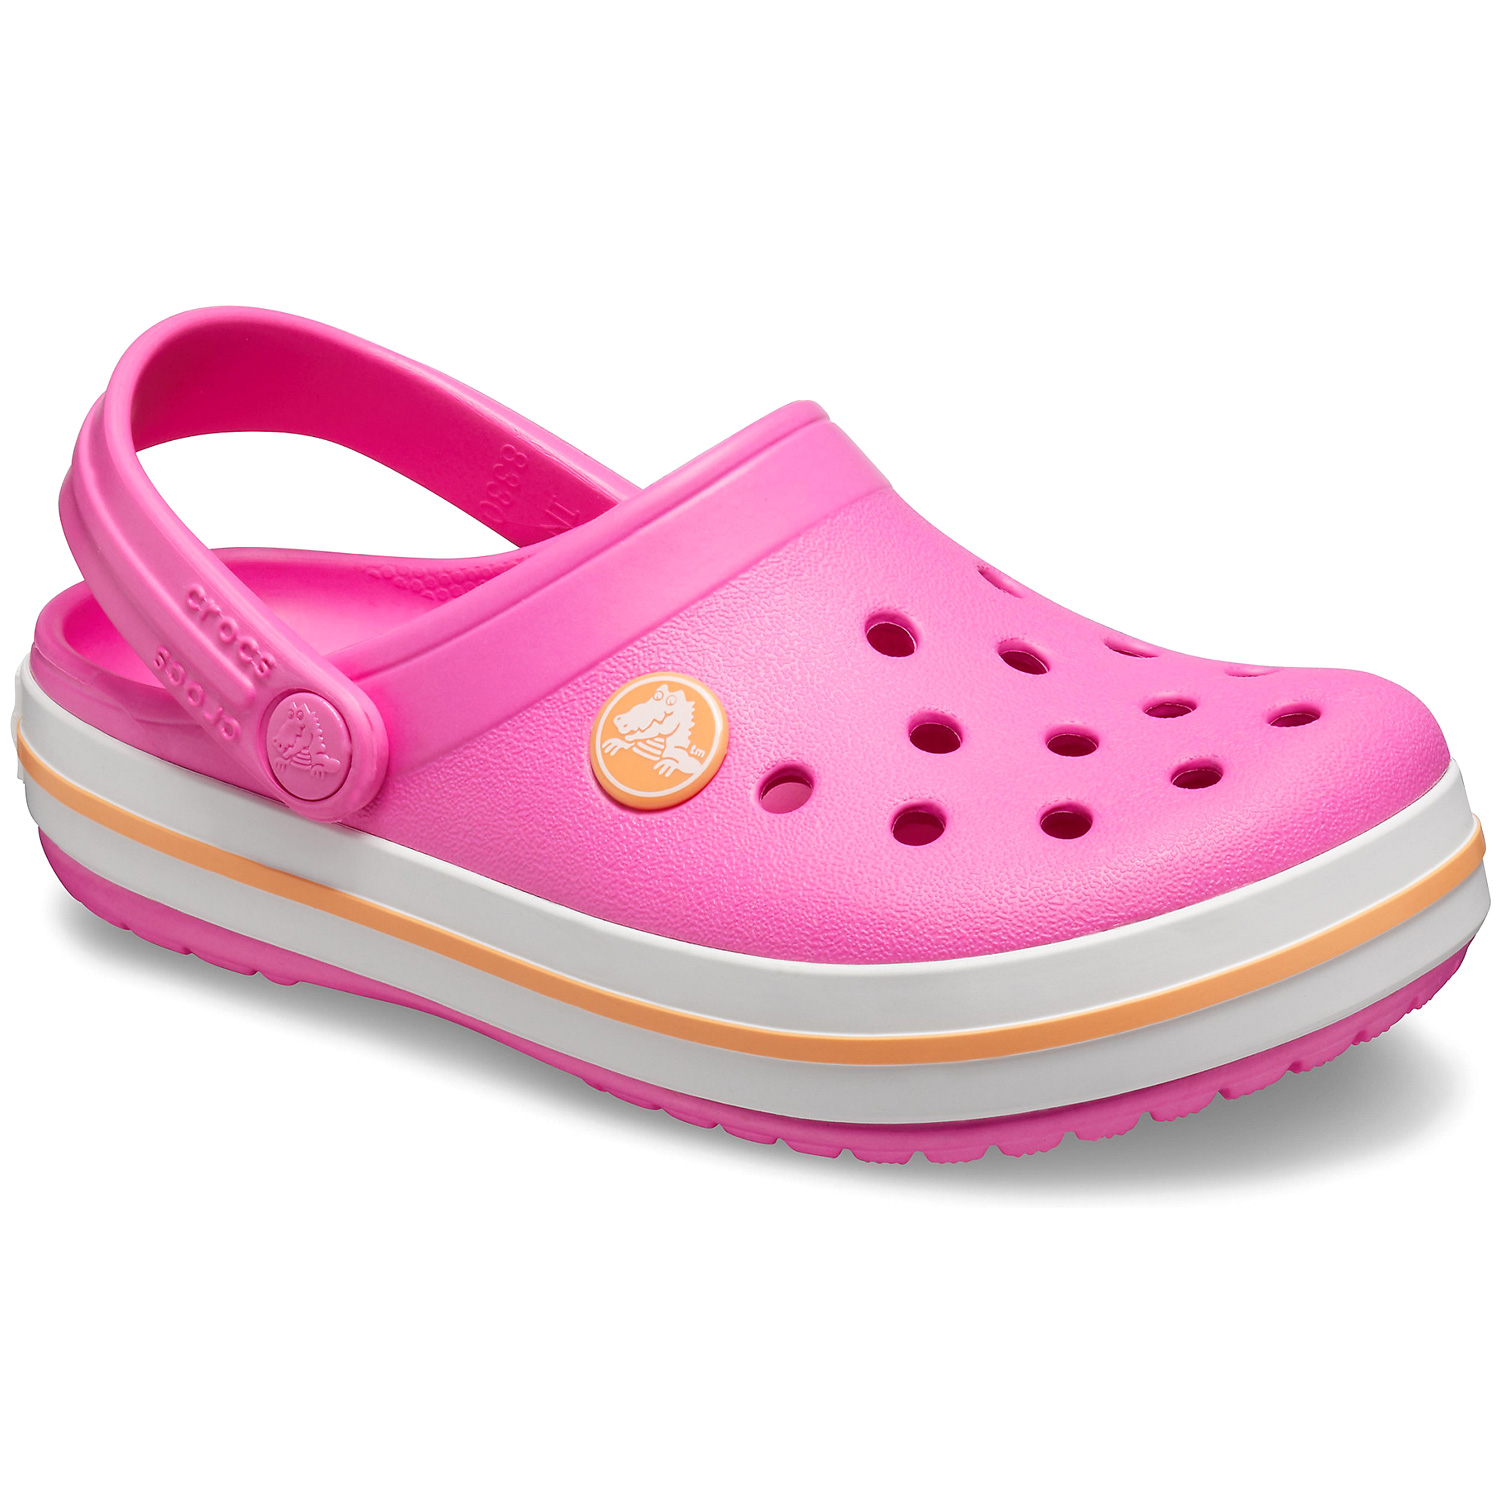 crocs slippers for toddlers